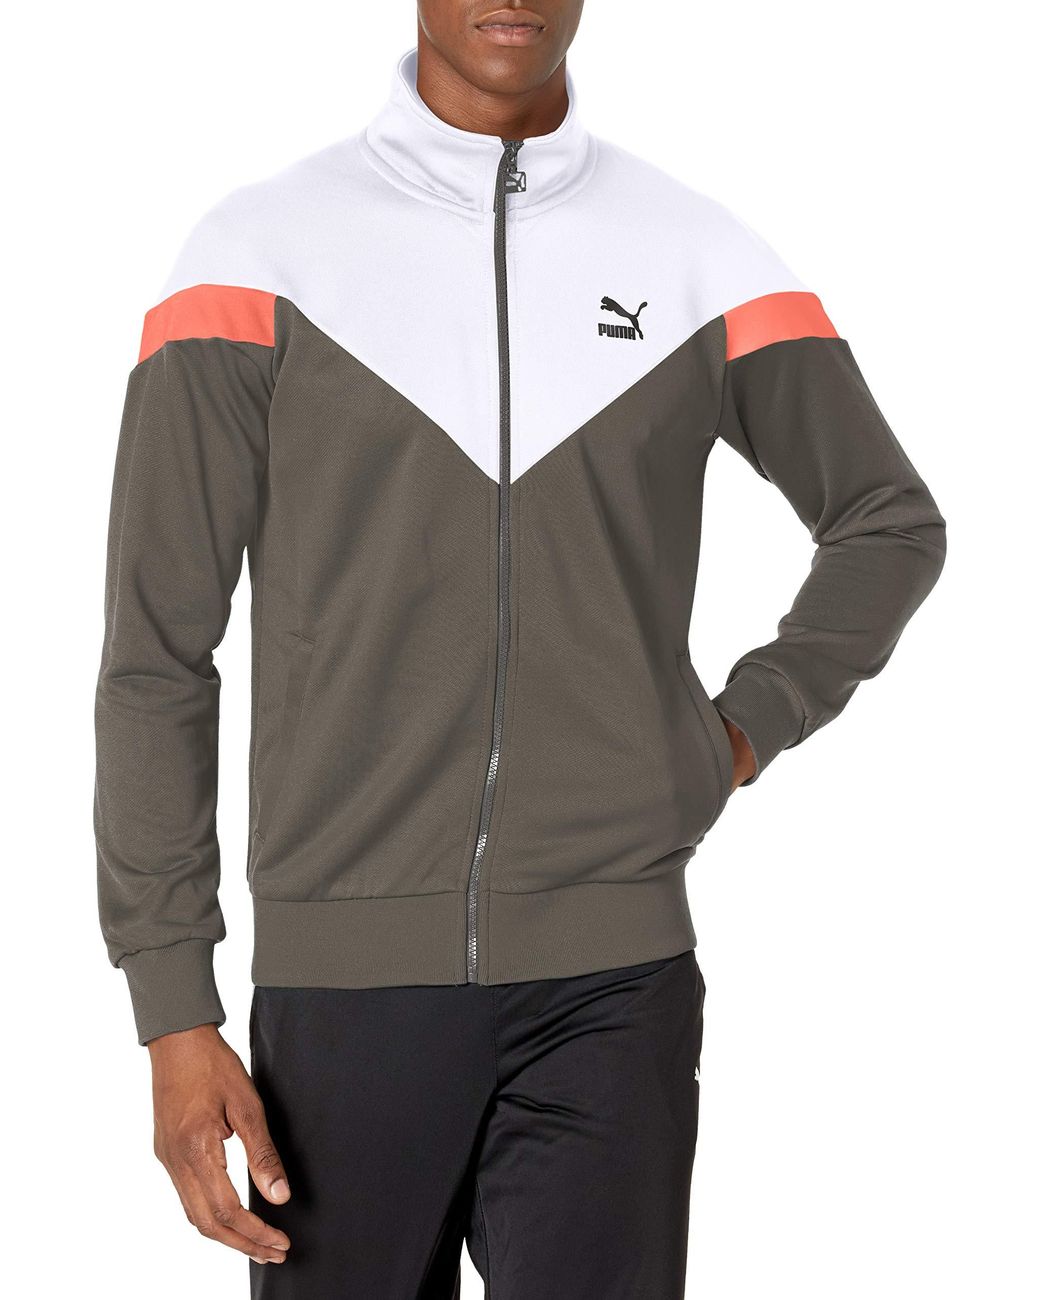 PUMA Cotton Iconic Mcs Track Jacket in Ultra Gray (Gray) for Men - Save ...